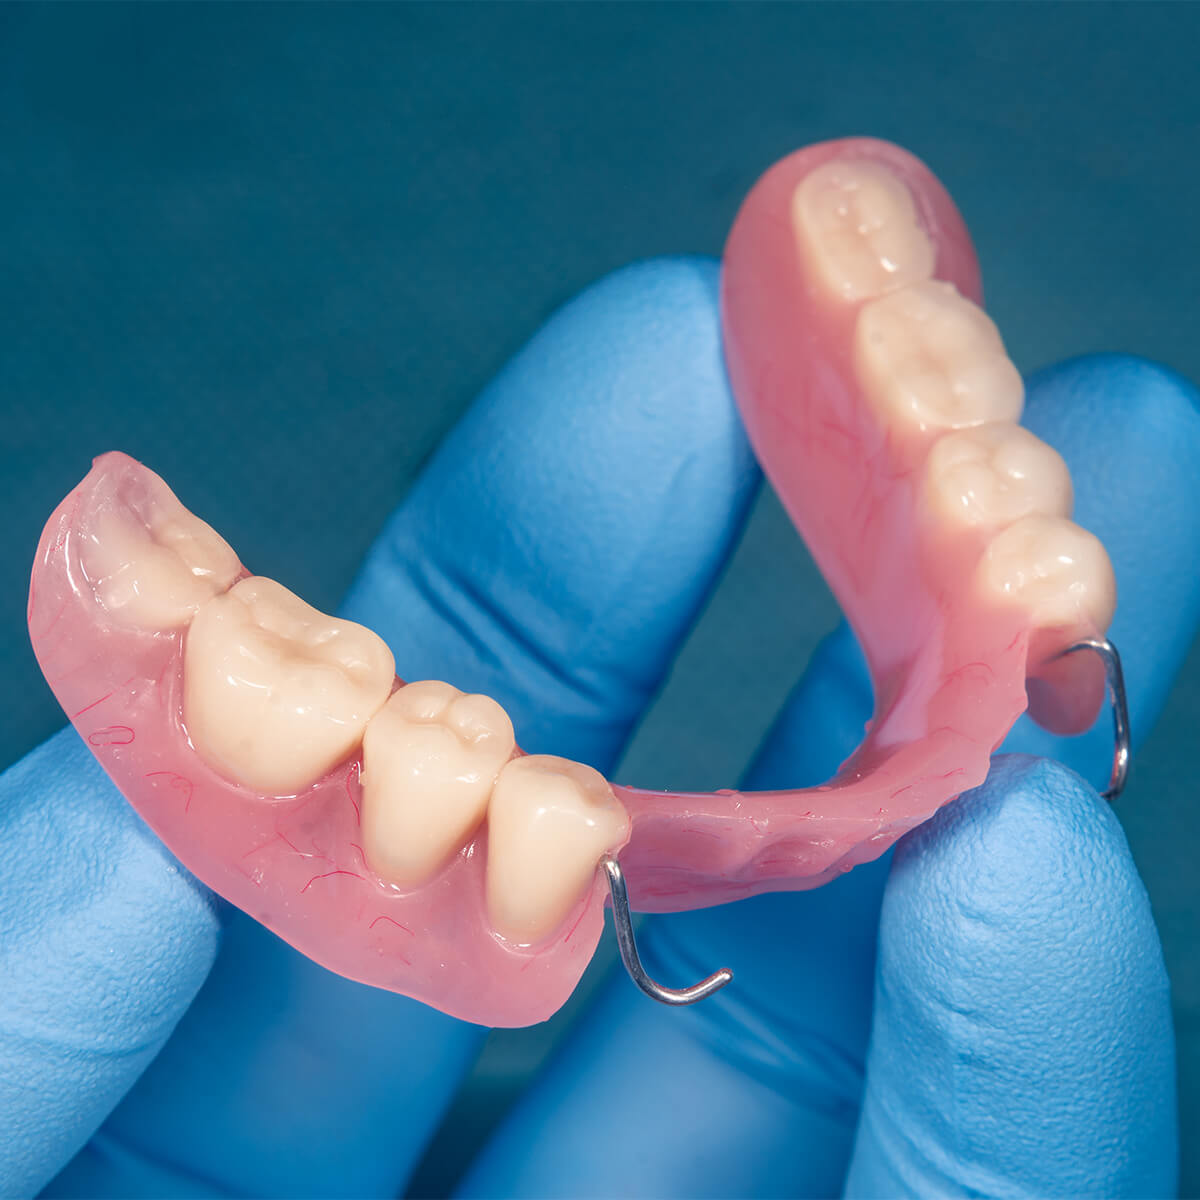 Partial Dentures for Front Teeth in Knoxville TN Area